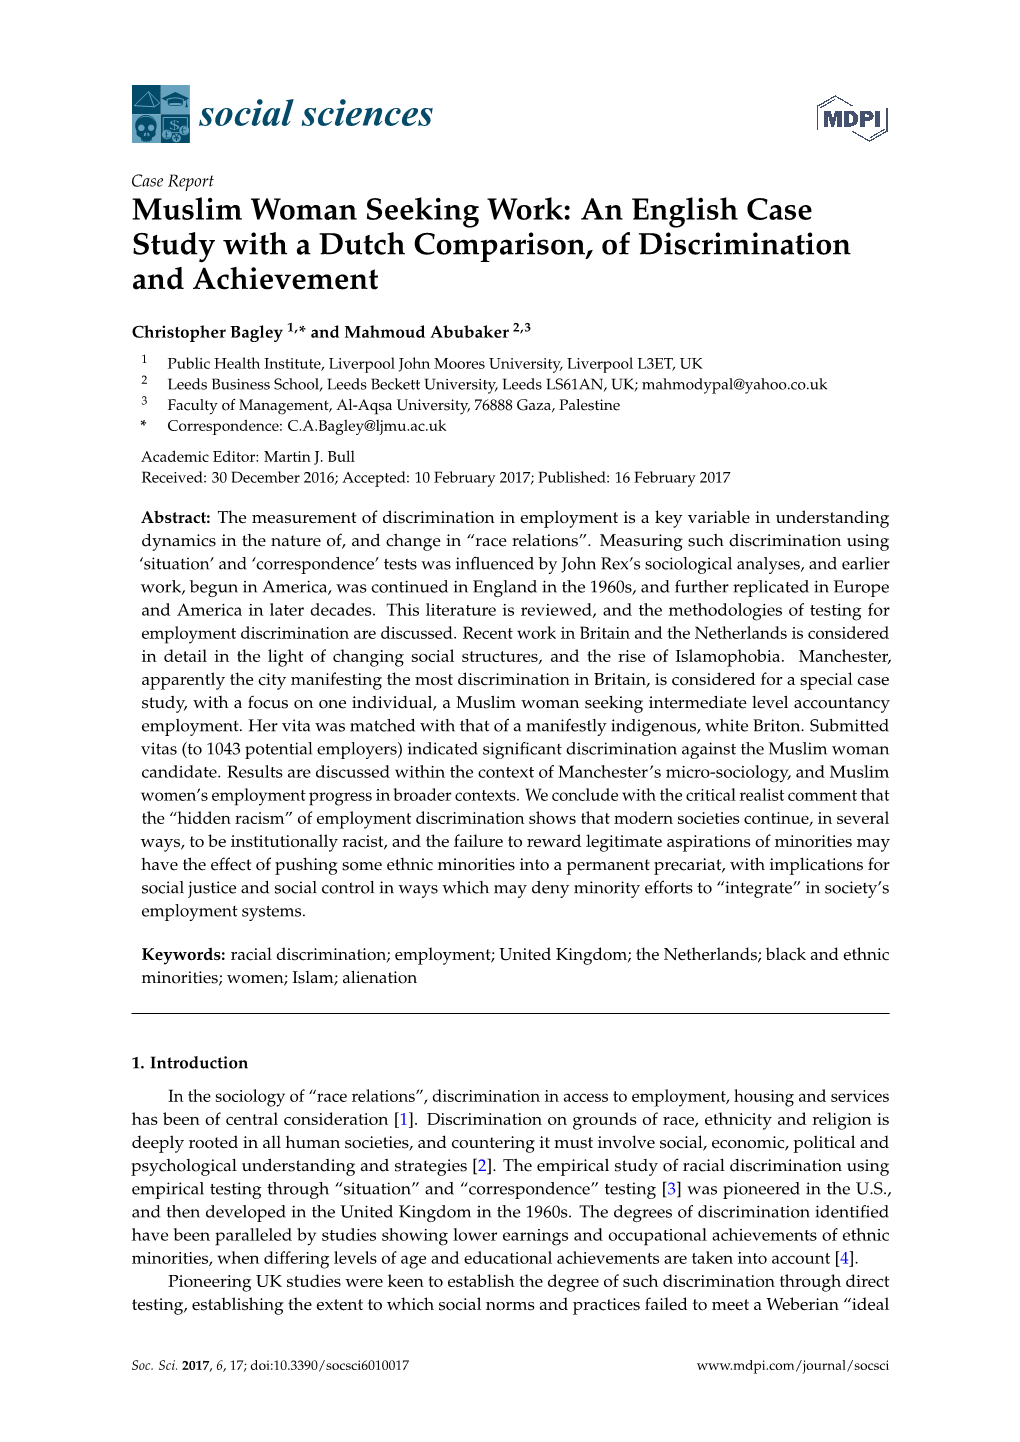 An English Case Study with a Dutch Comparison, of Discrimination and Achievement